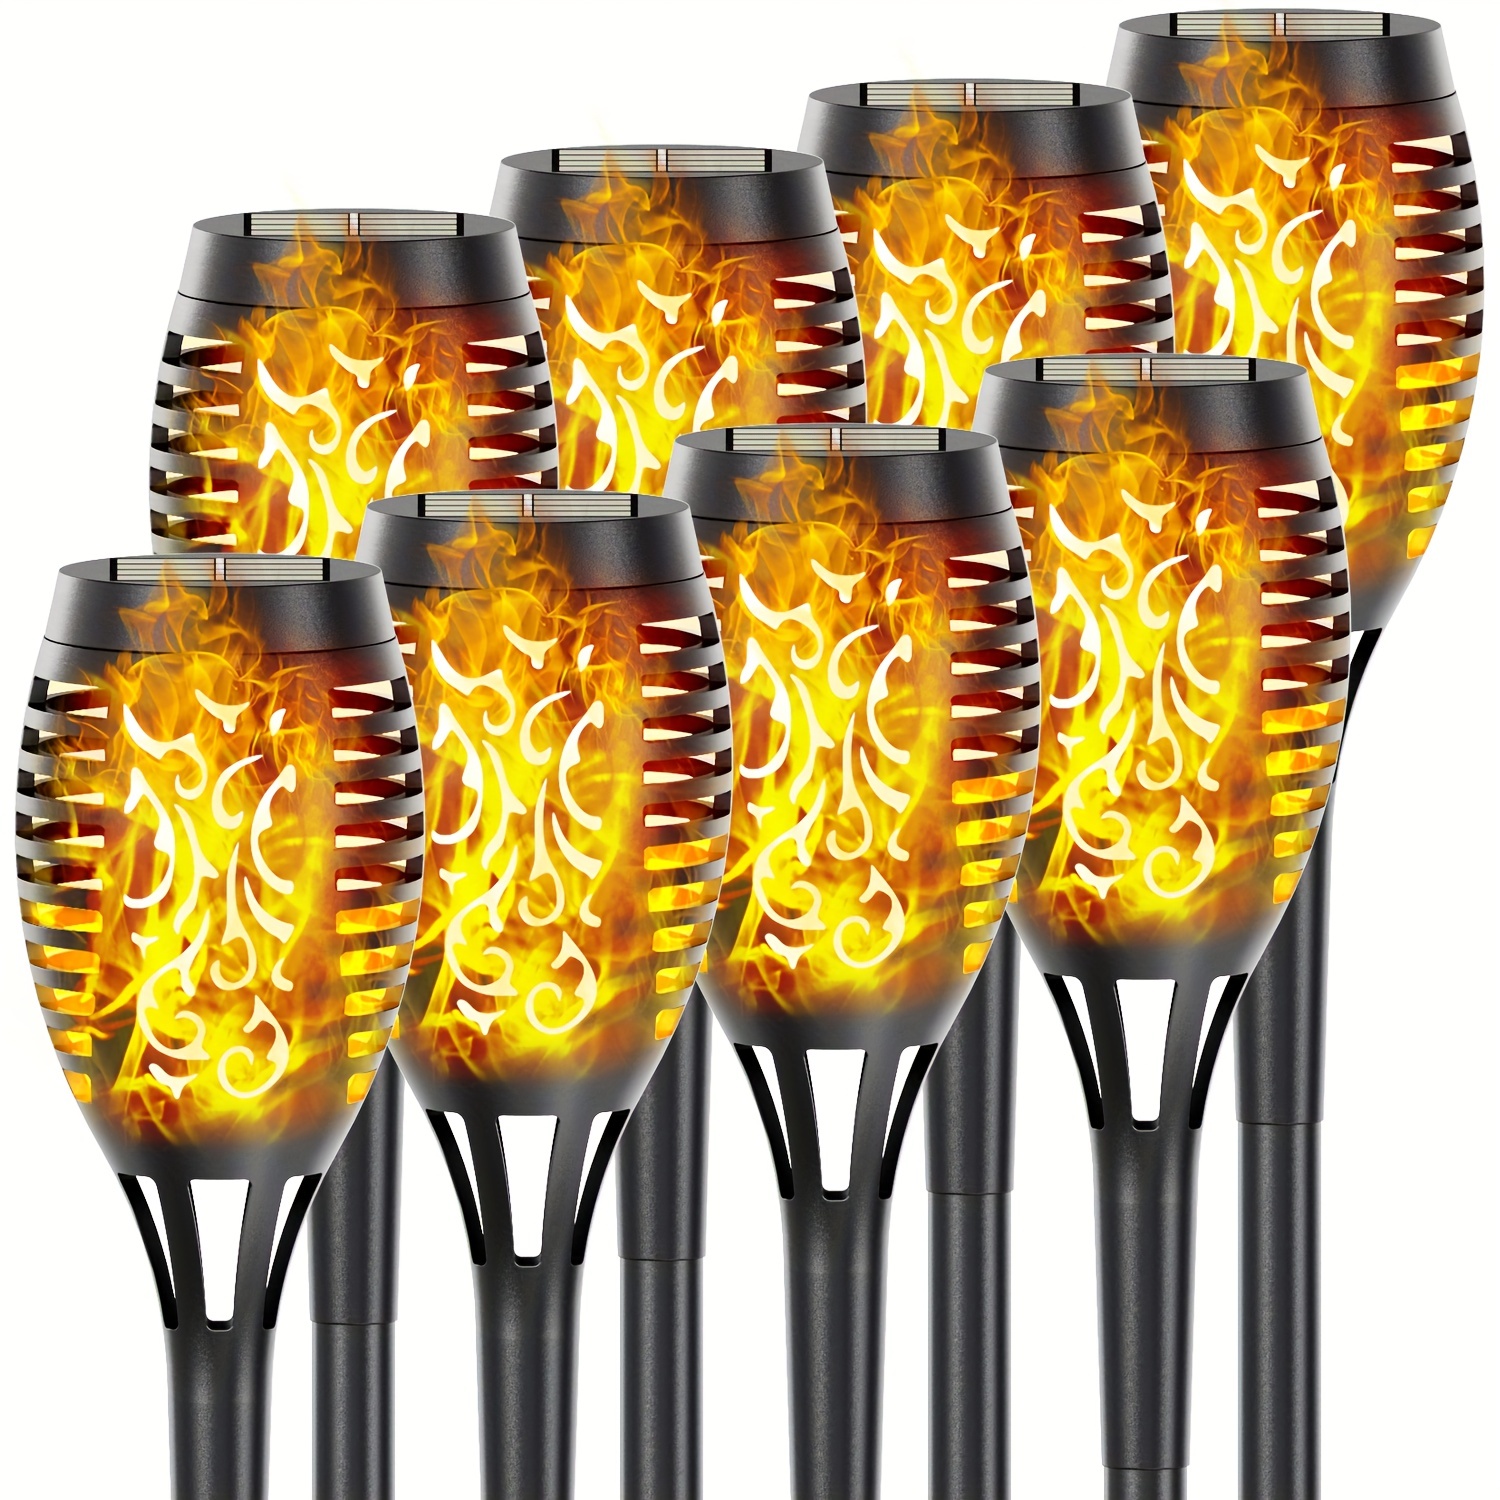 4/8/12 Pack LED Solar Torch Light, with Stylish Flickering Flame Outdoor Waterproof Lights, Solar Torches Stake Lights, Solar Garden Decorations Lights, For Garden, Courtyard, Corridor, Parties, Barbecues, Camping, Halloween, Christmas.